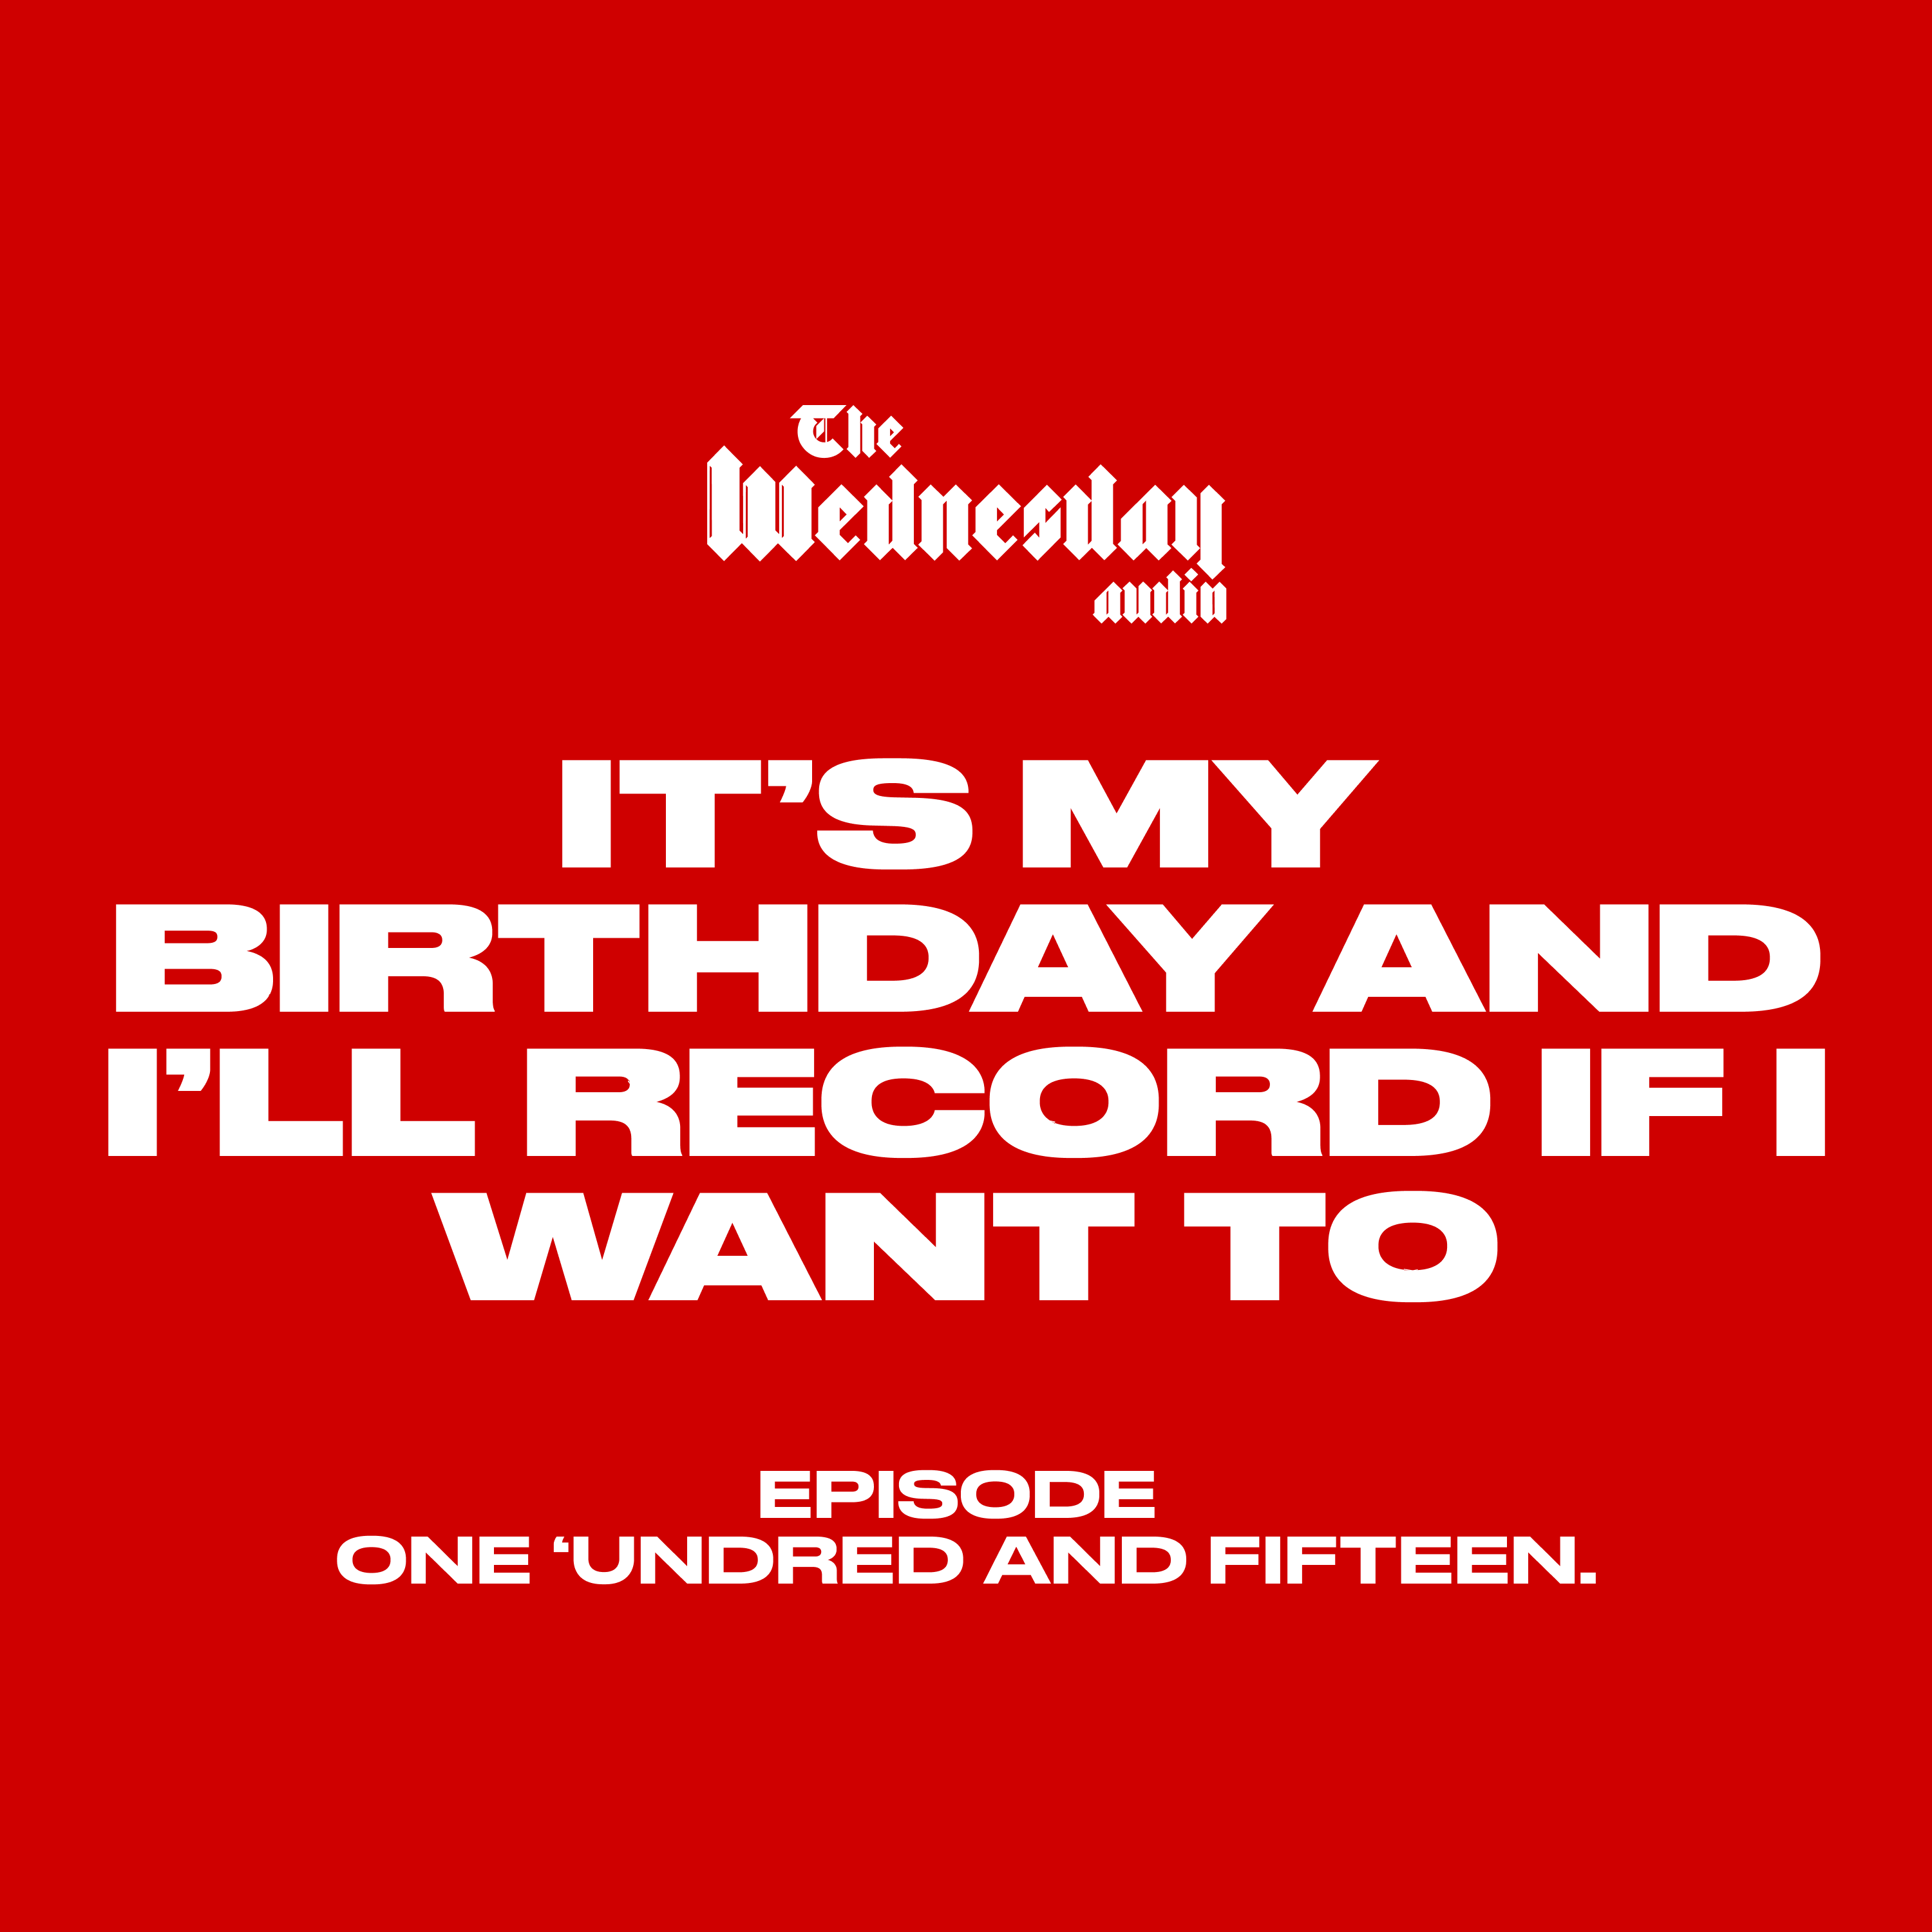 It's my birthday and I'll record if I want to